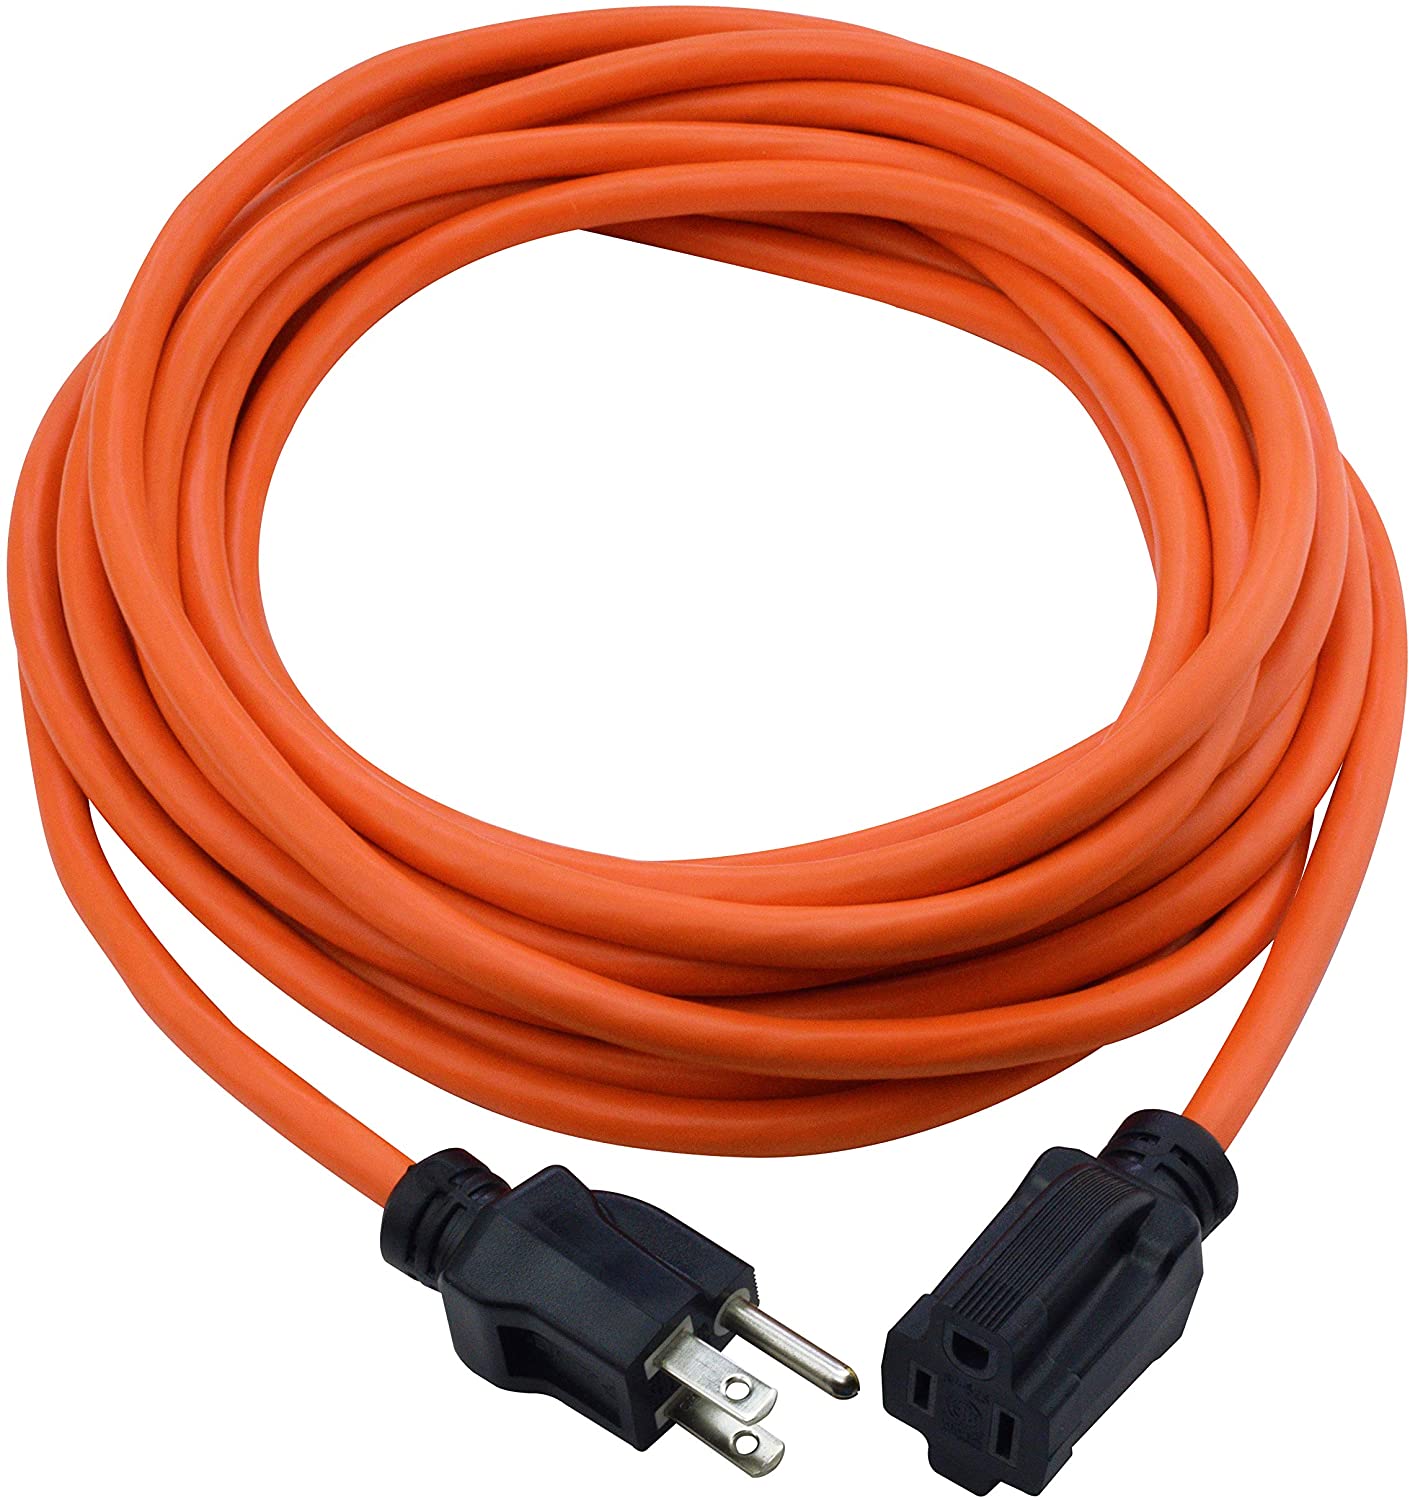 Prime Wire &amp; CAble | Extension
Cord 25 Ft Outdoor Orange
16/3AWG